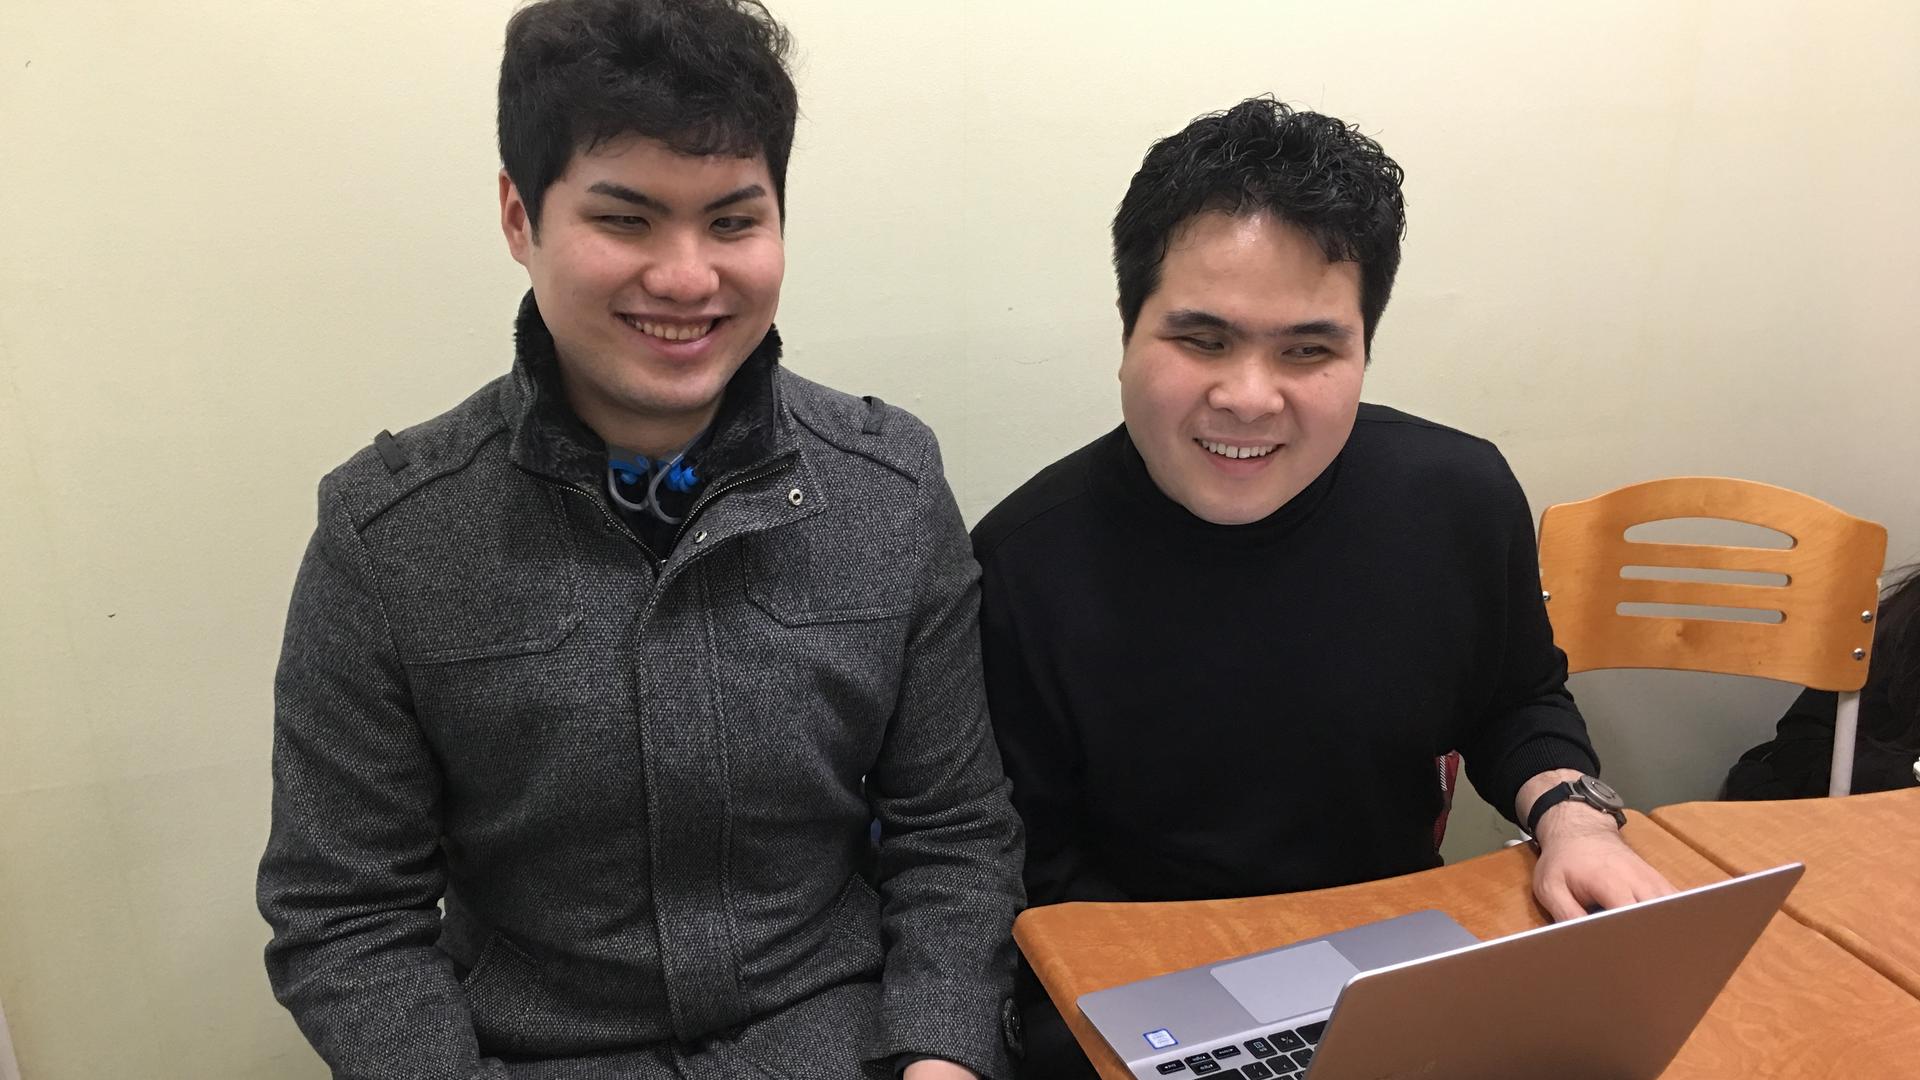 Lee Chang-hoo (l) and Kwon Soon-chul (r) started a baseball podcast, along with another visually impaired baseball fan. But they don't tell their listeners that they're blind. "They probably think we're just average, amateur sports fans."